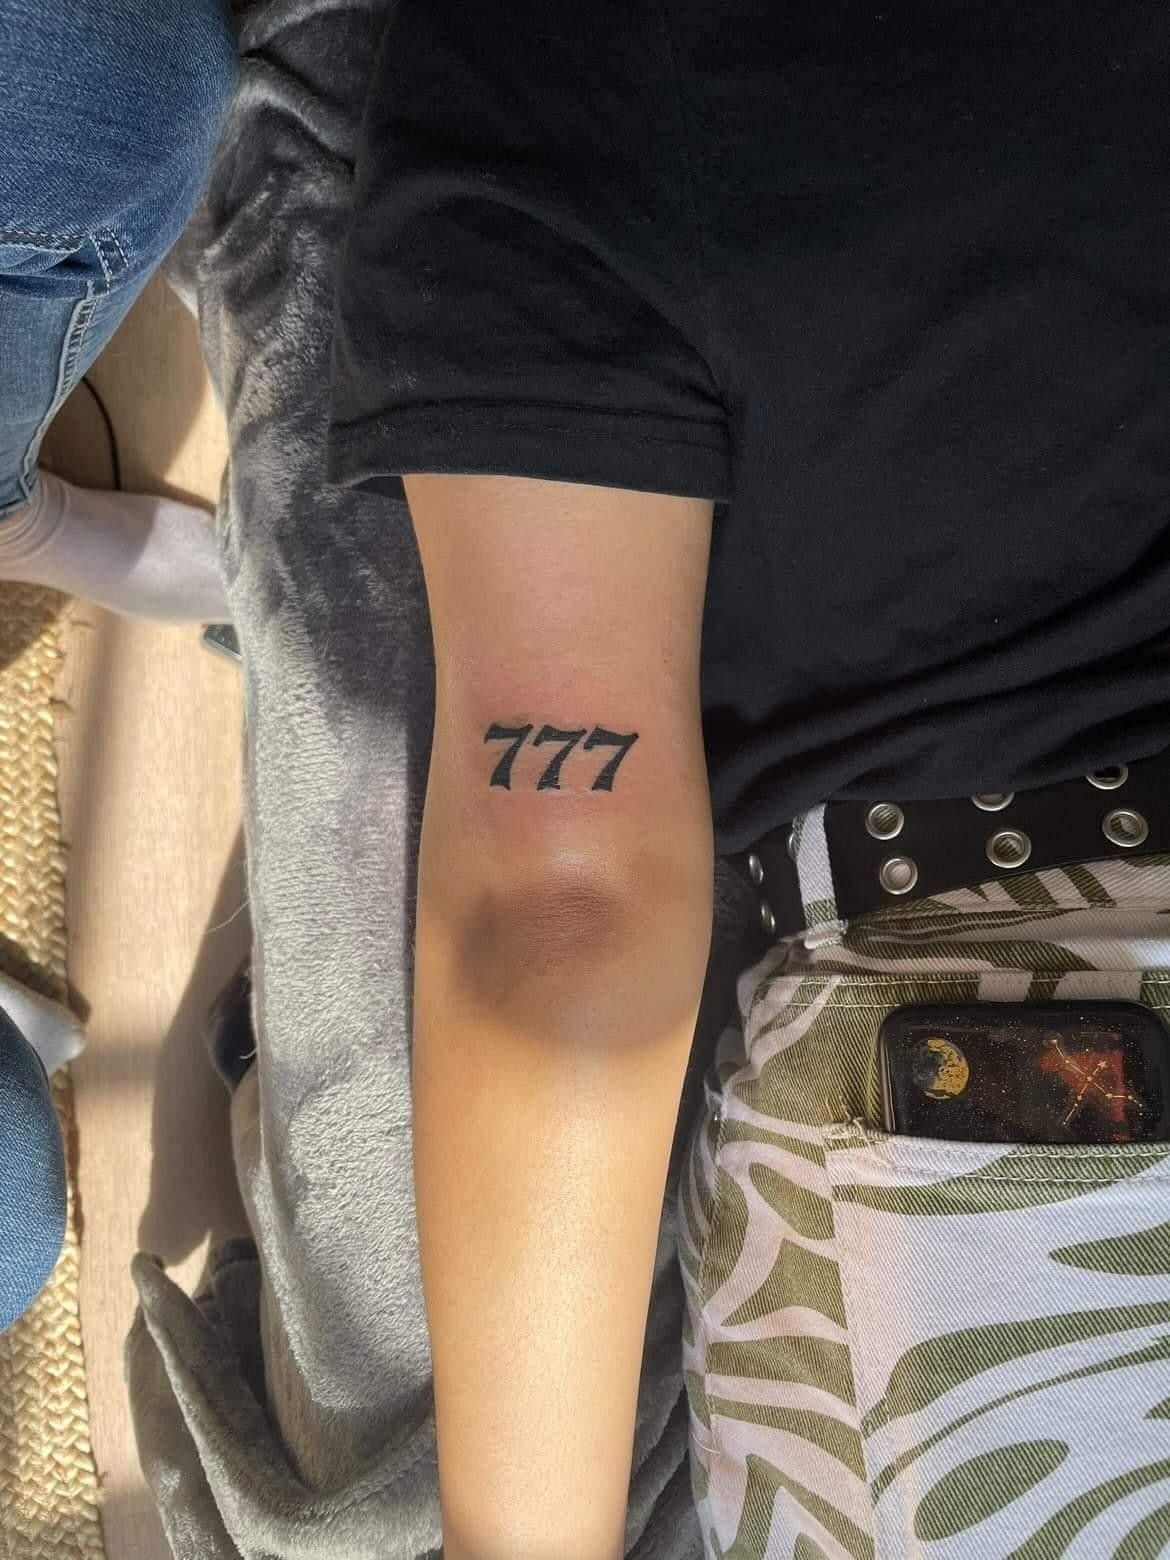 Elbow 777 angel number tattoo